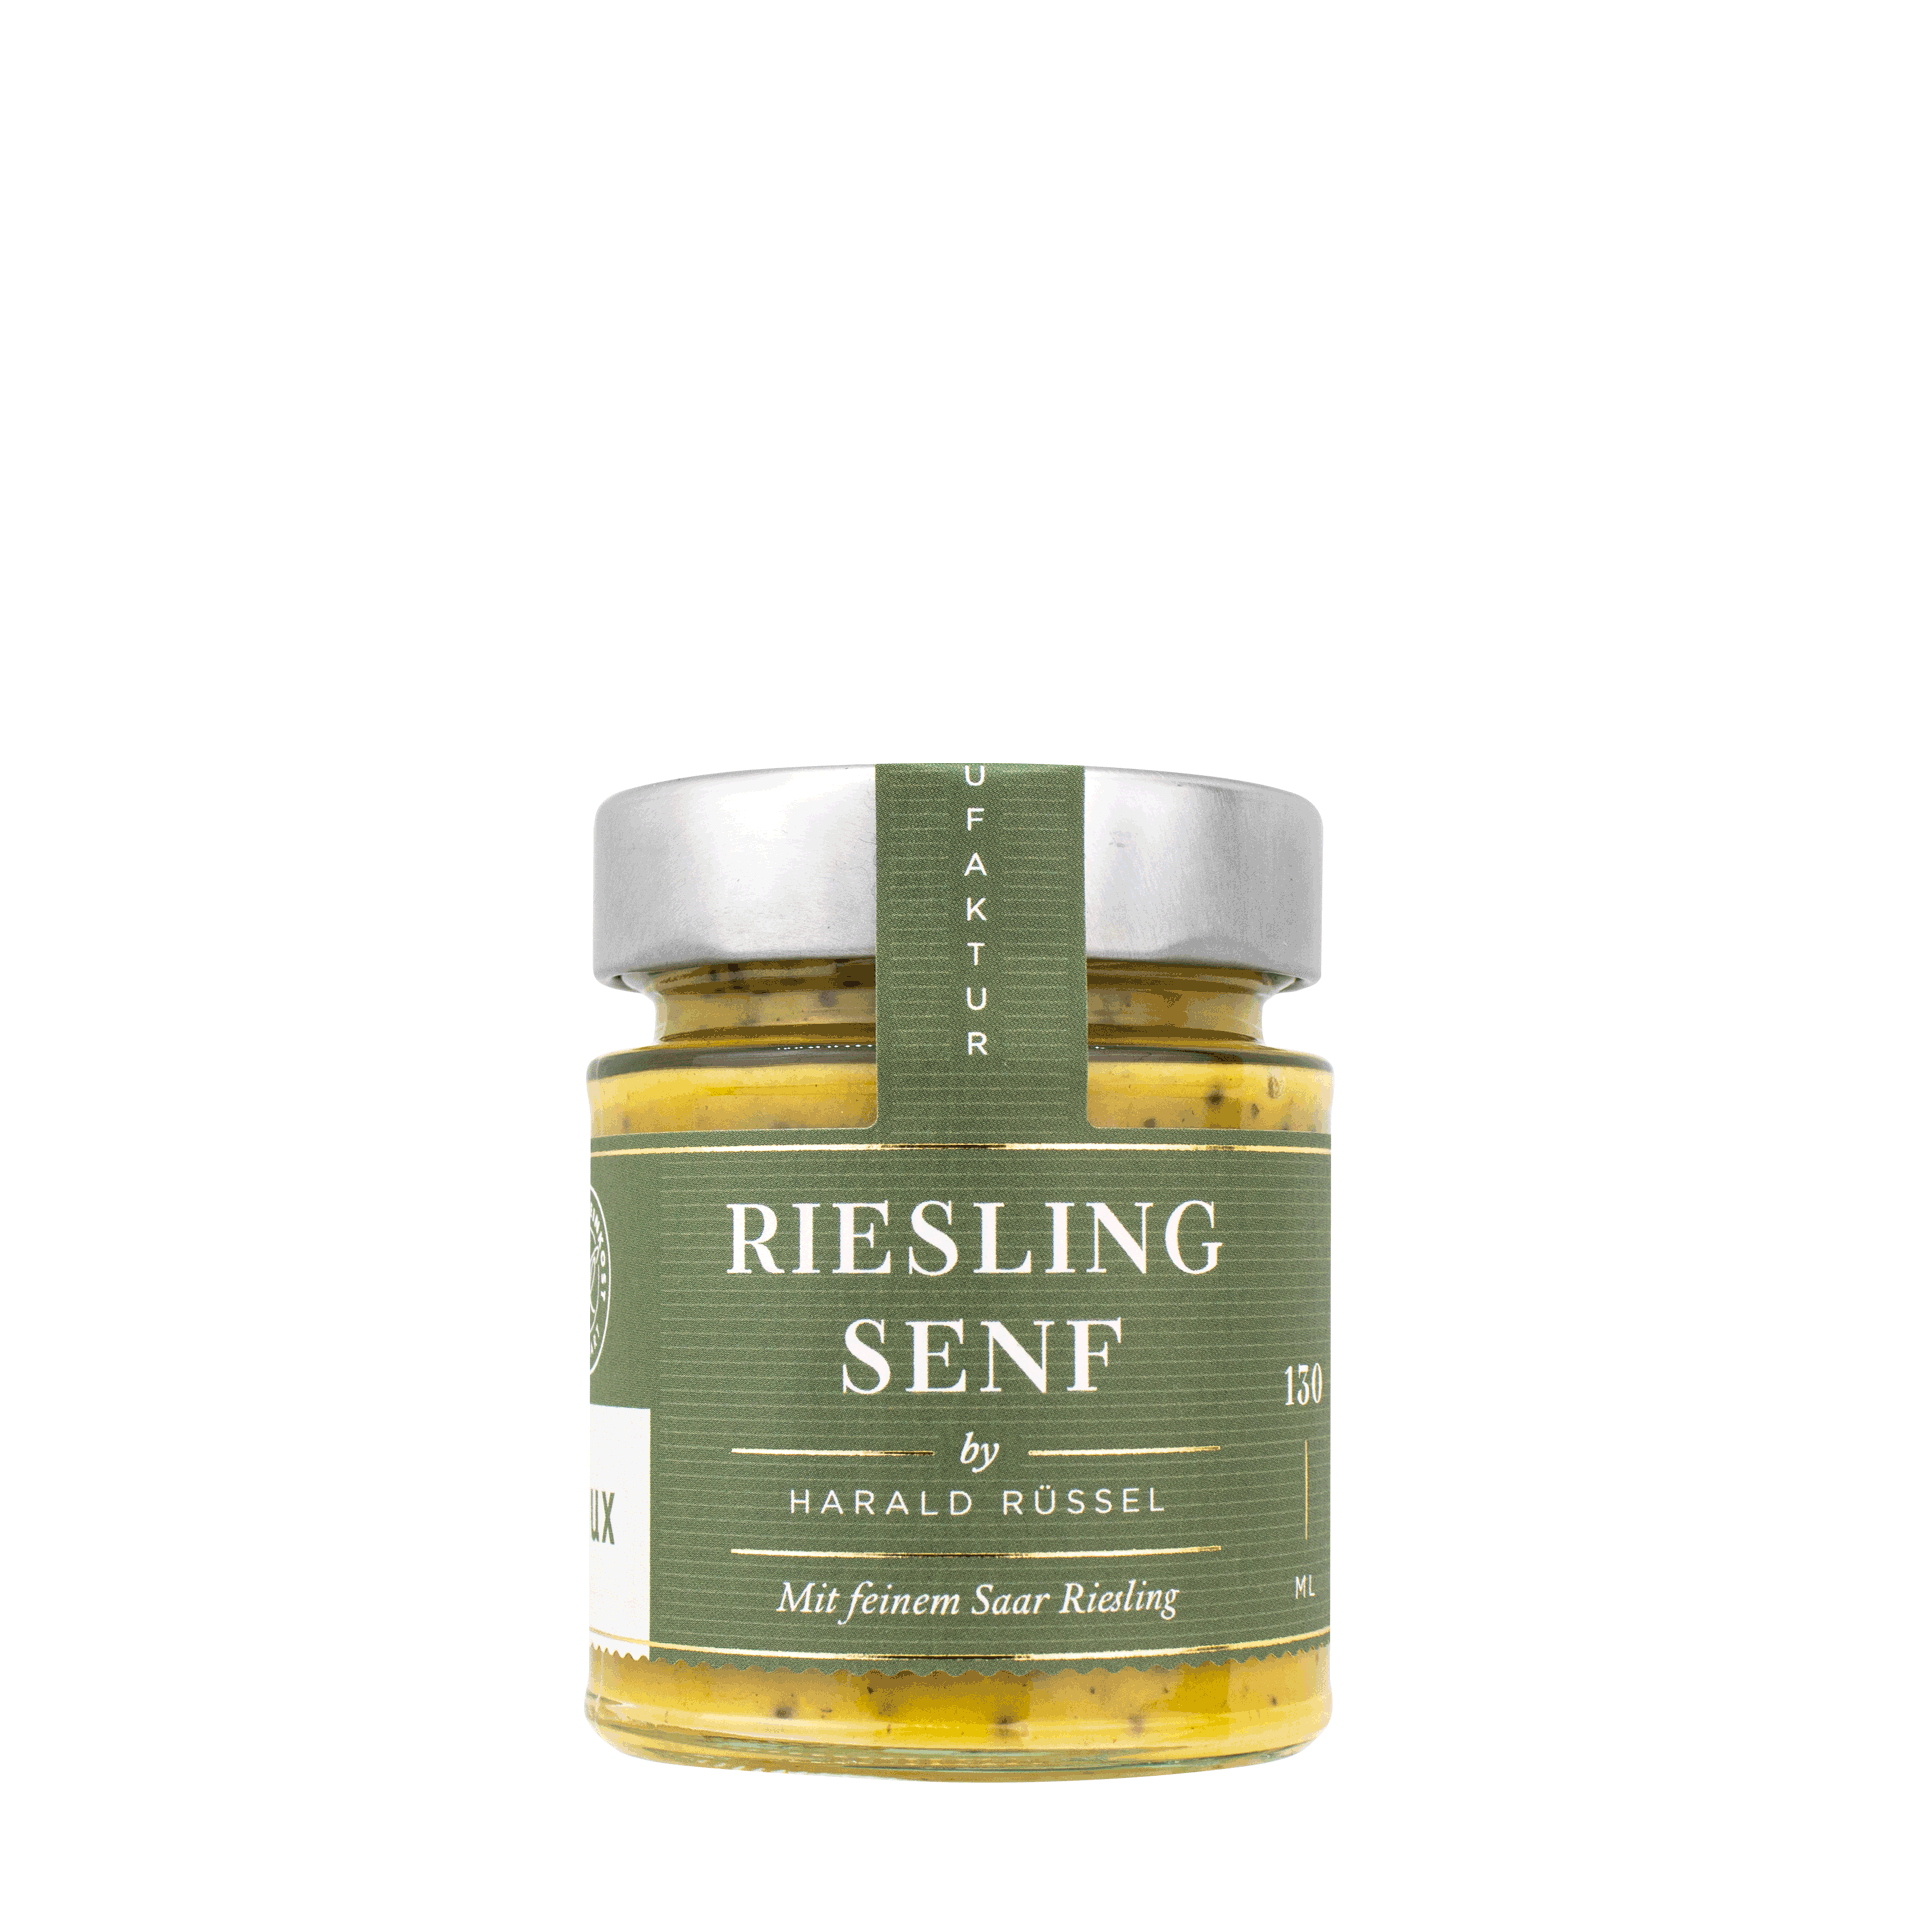 Riesling Senf by Harald Rüssel